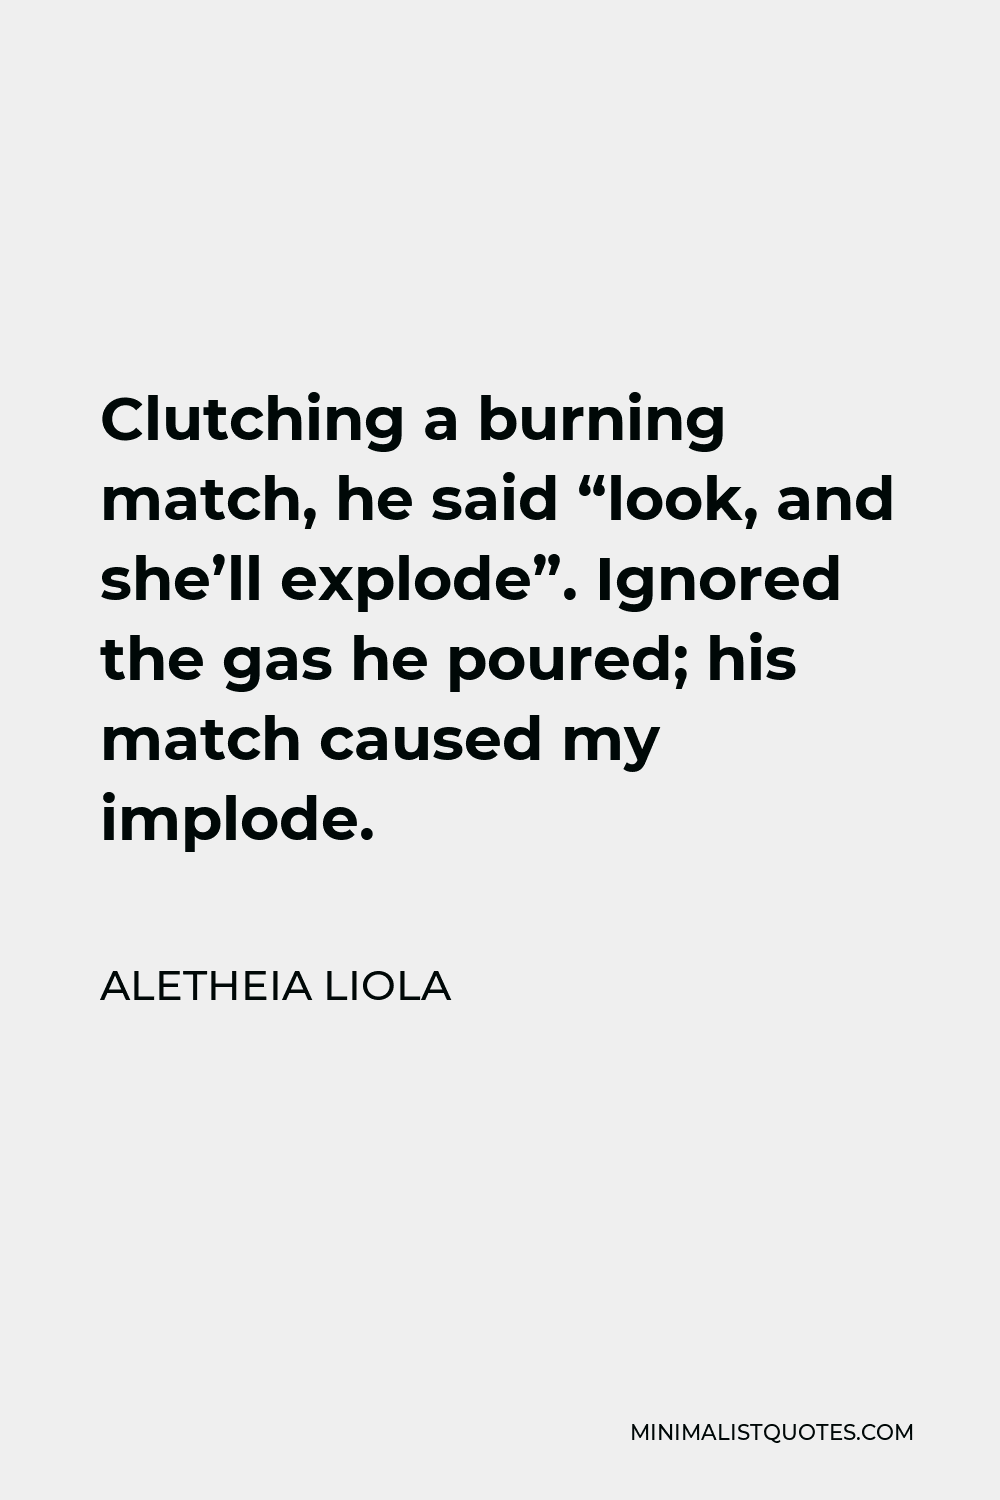 Aletheia Liola Quote - Clutching a burning match, he said “look, and she’ll explode”. Ignored the gas he poured; his match caused my implode.